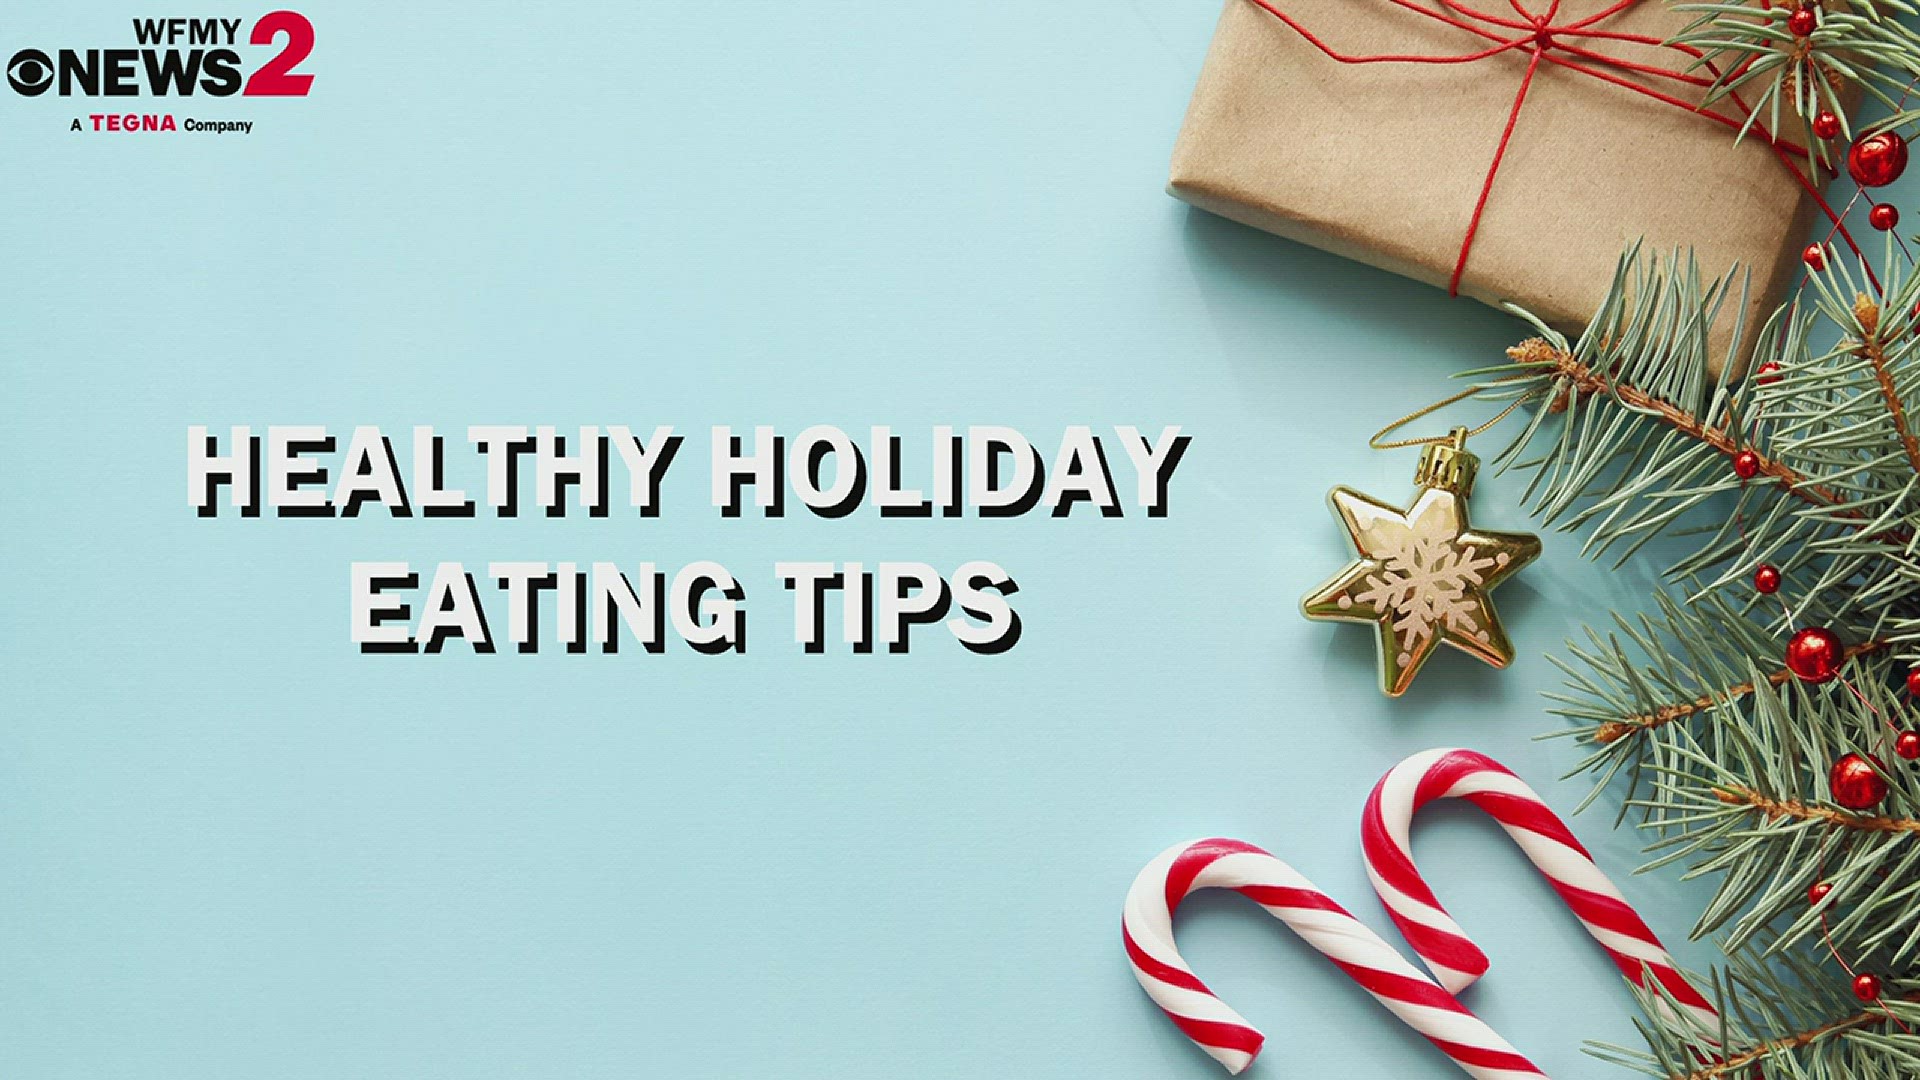 Novant Health Dietitians Share Healthy Holiday Eating Tips